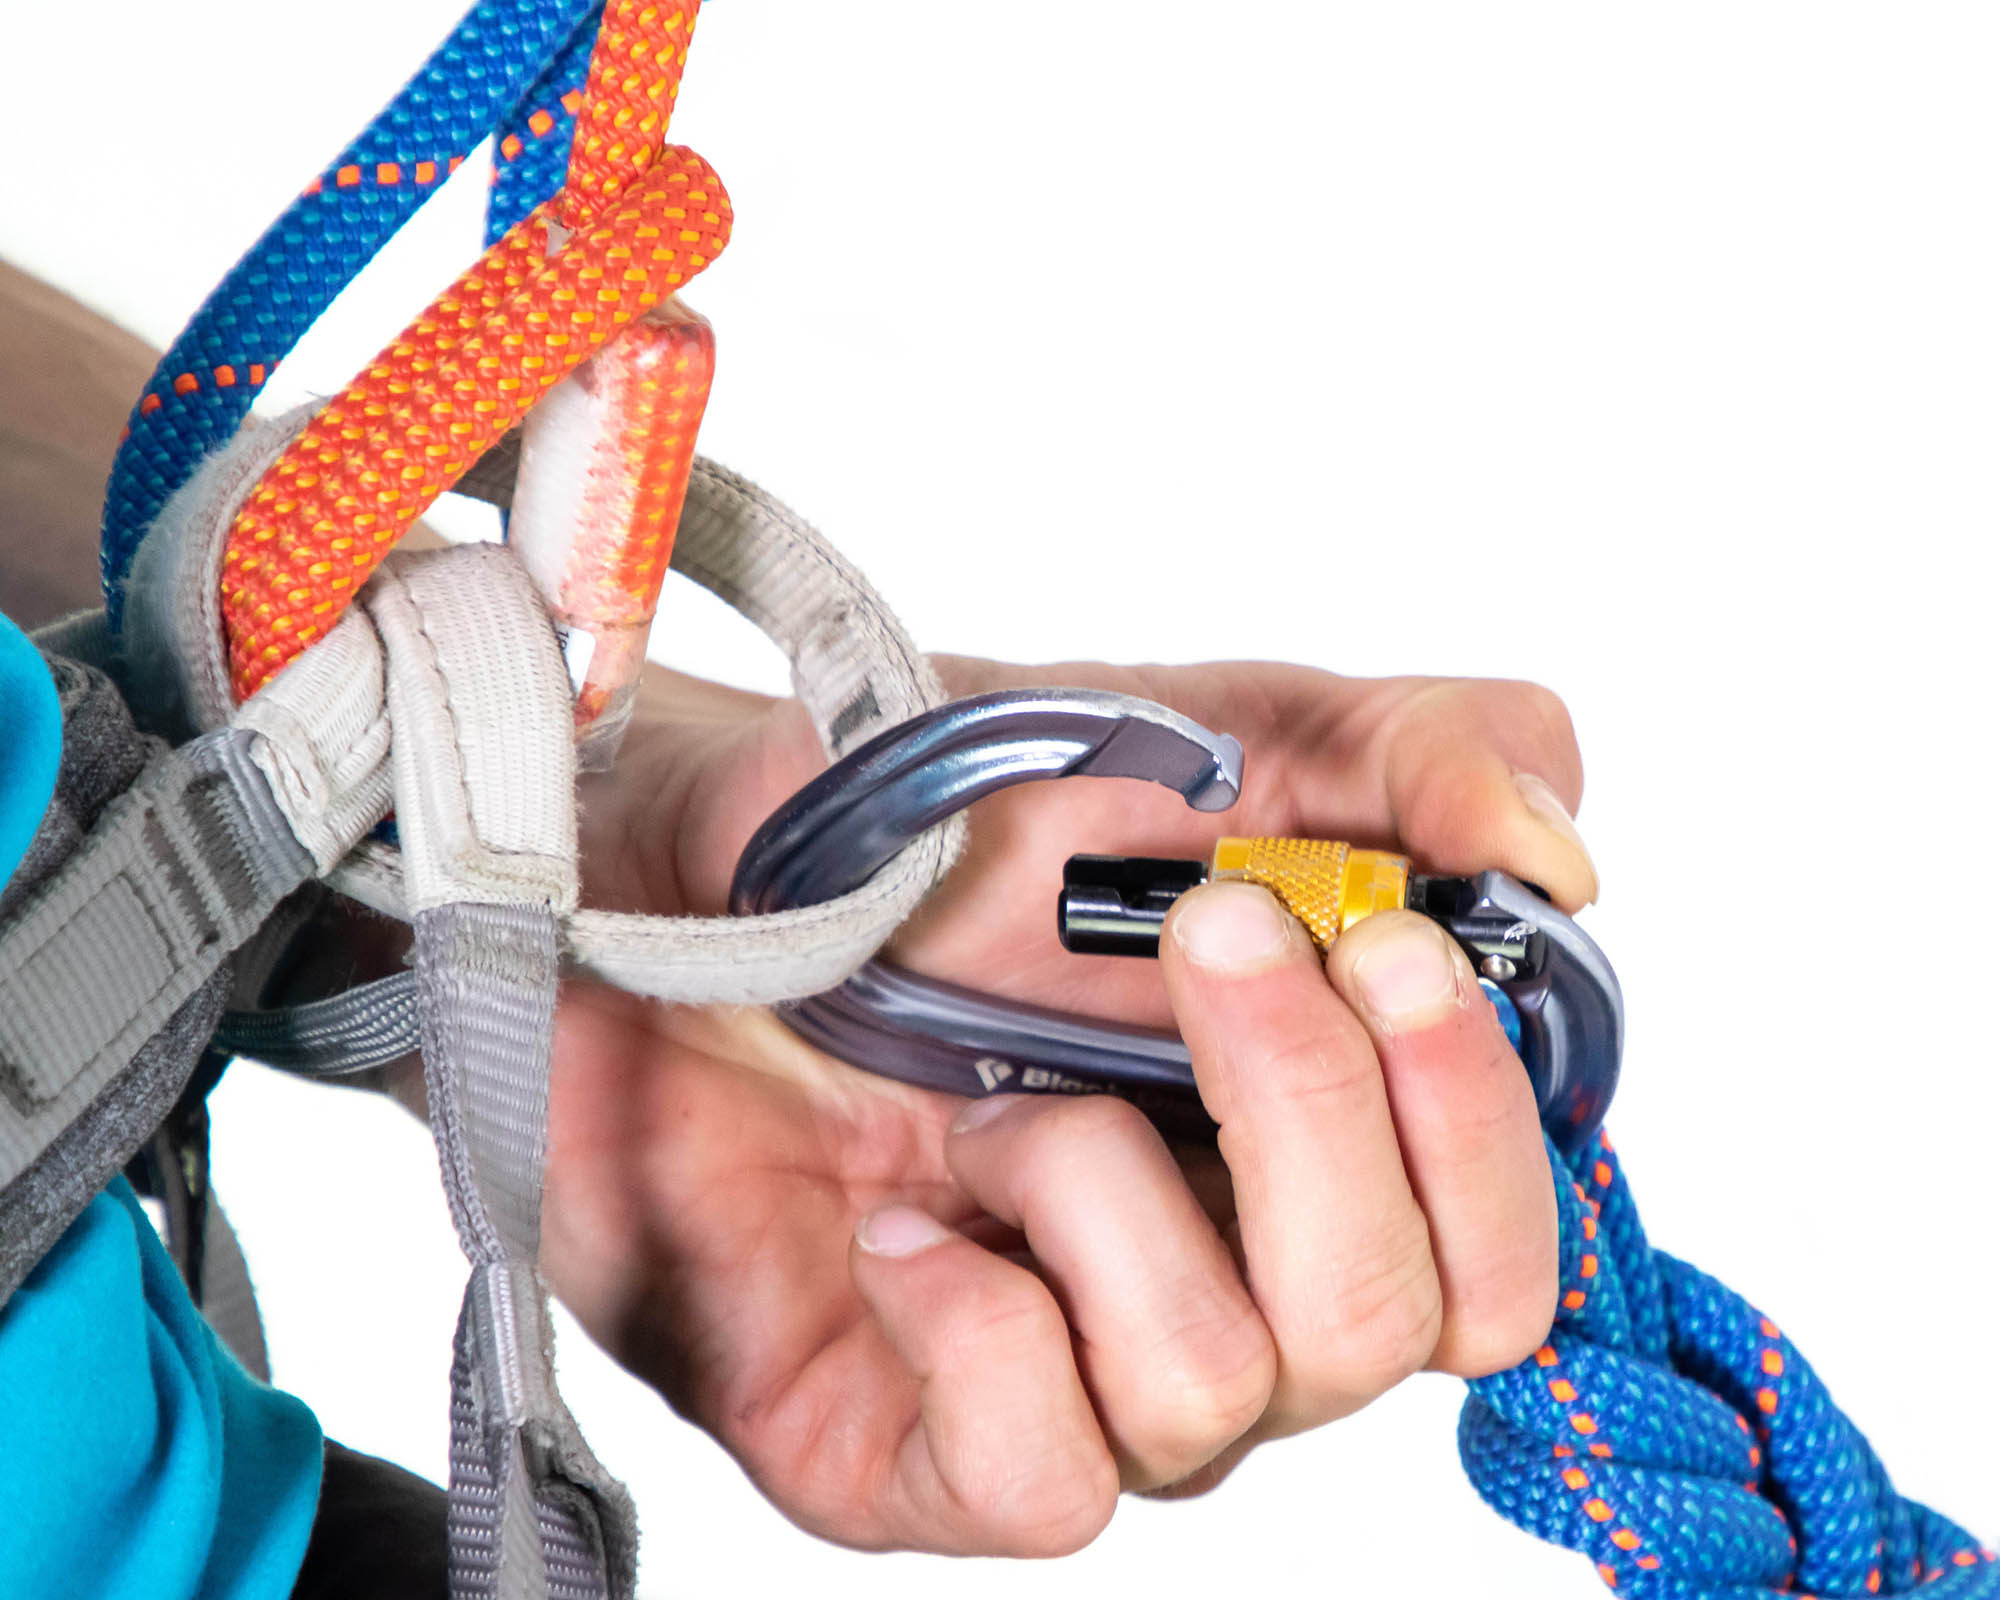 clipping overhand knot to belay loop